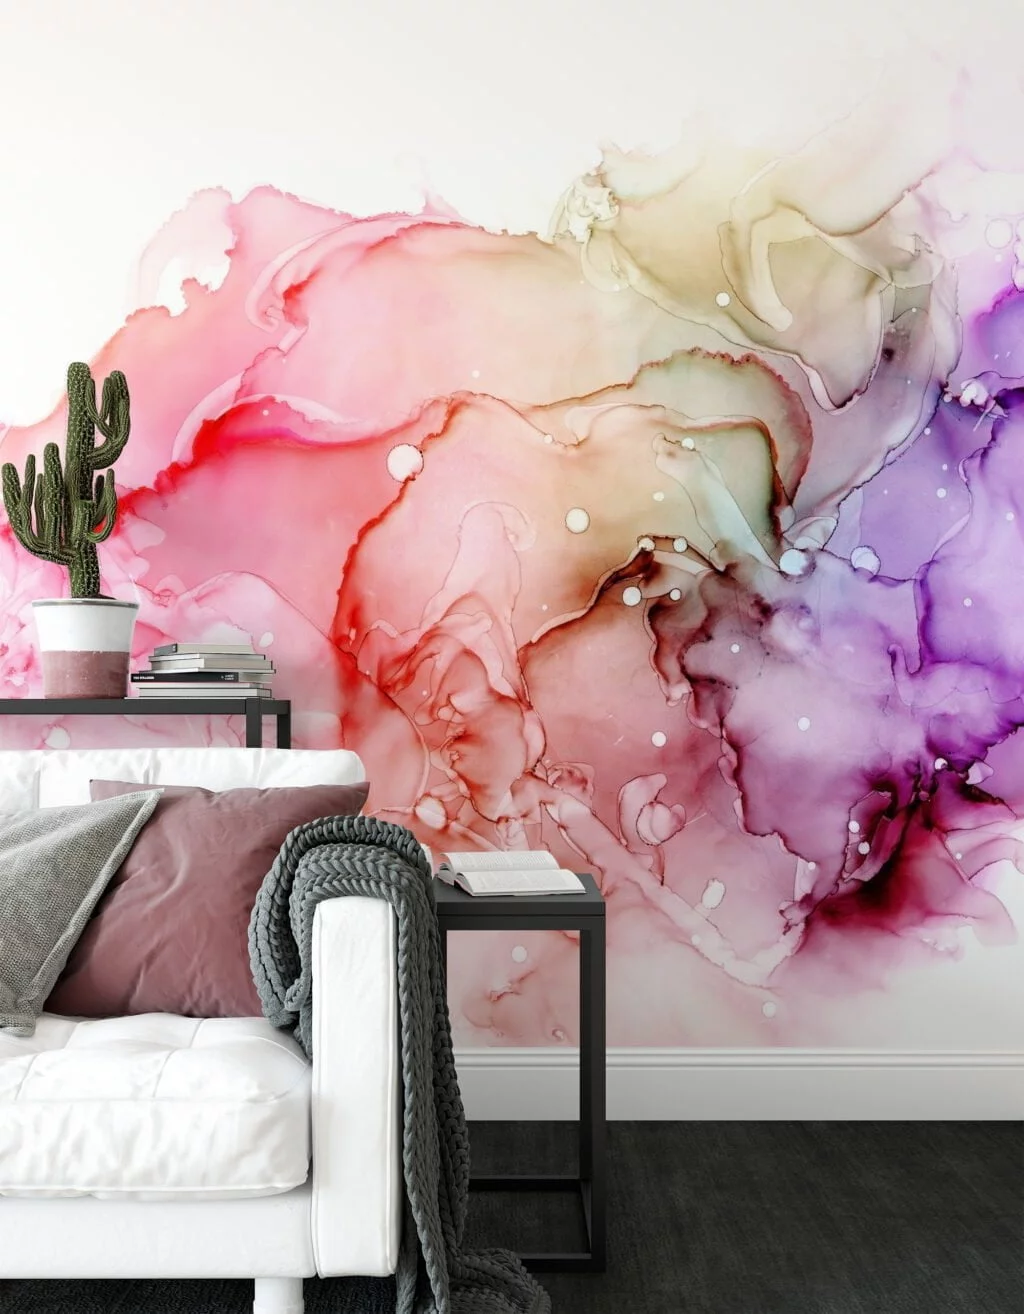 Abstract Multicolored Ink Splash Wallpaper - High-Quality Peel & Stick Self-Adhesive Mural